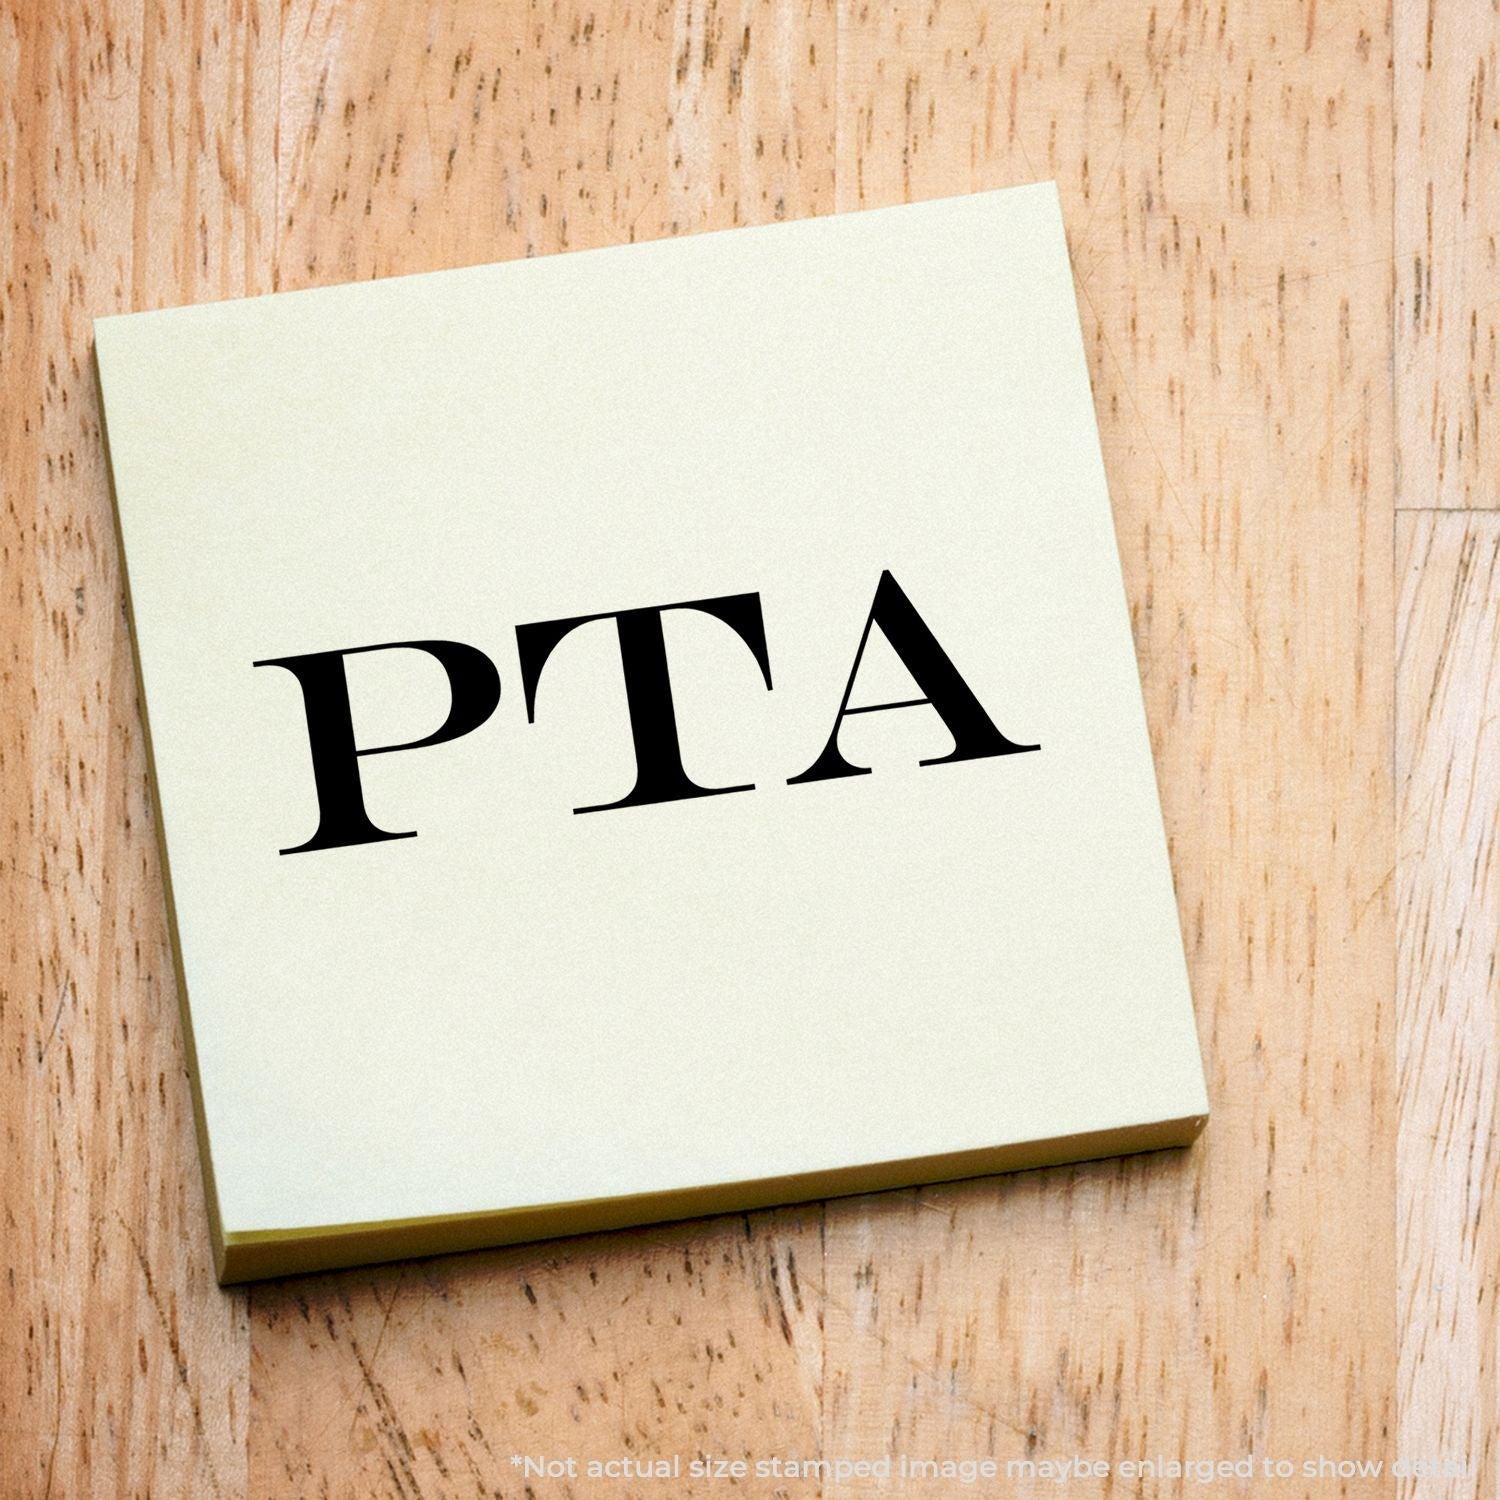 A self-inking stamp with a stamped image showing how the text "PTA" is displayed after stamping.